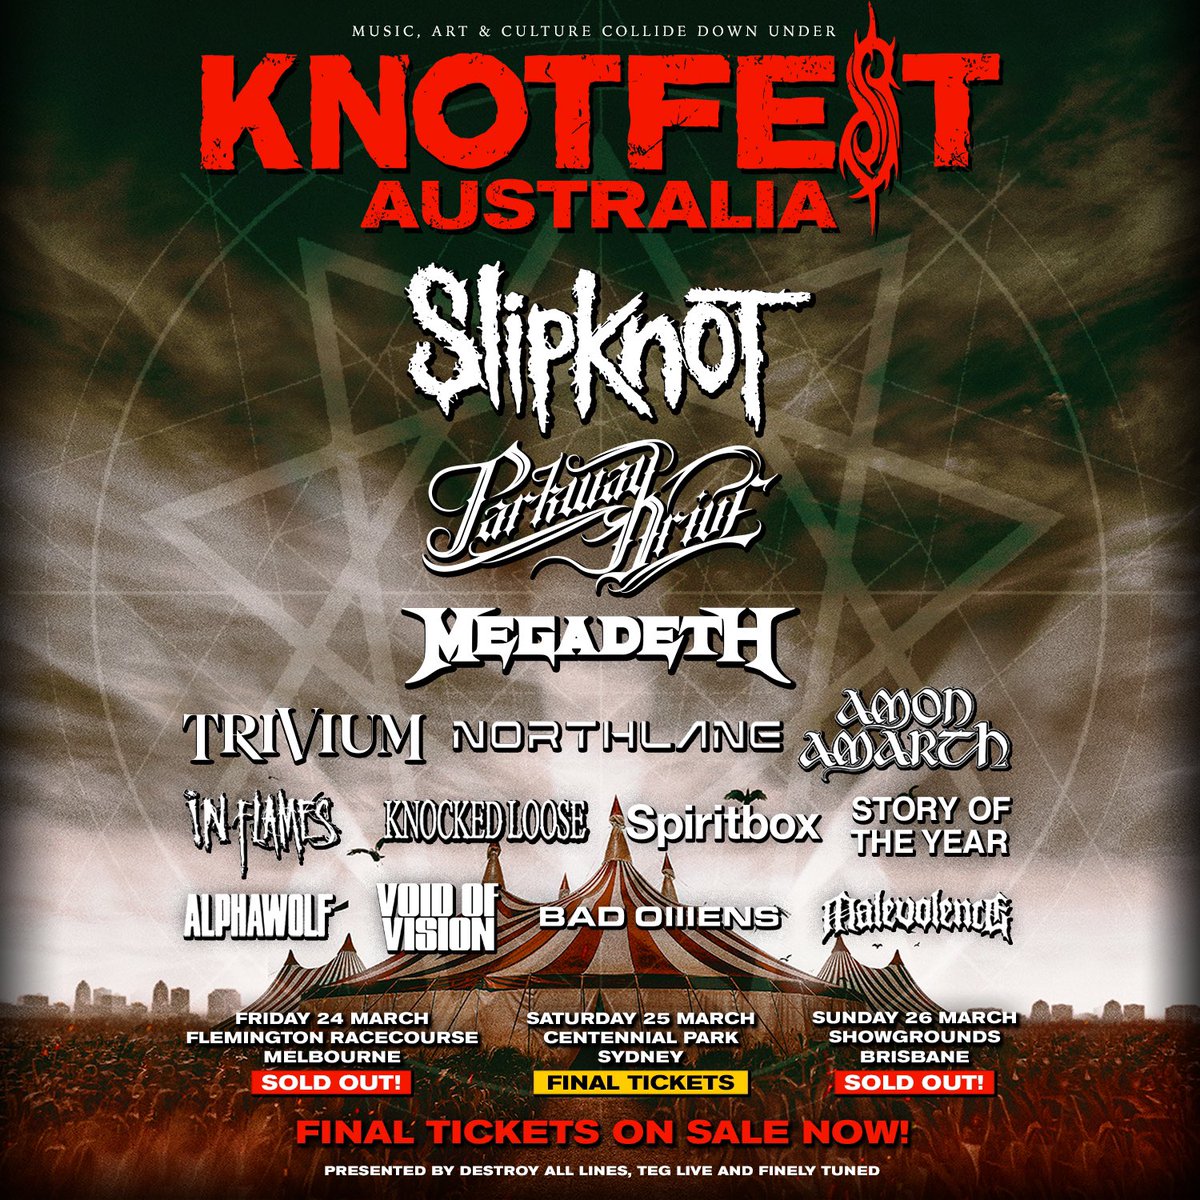 KNOTFEST Australia: Melbourne & Brisbane are now sold out. Get the final tickets for Sydney on 25 March at knotfest.com/australia